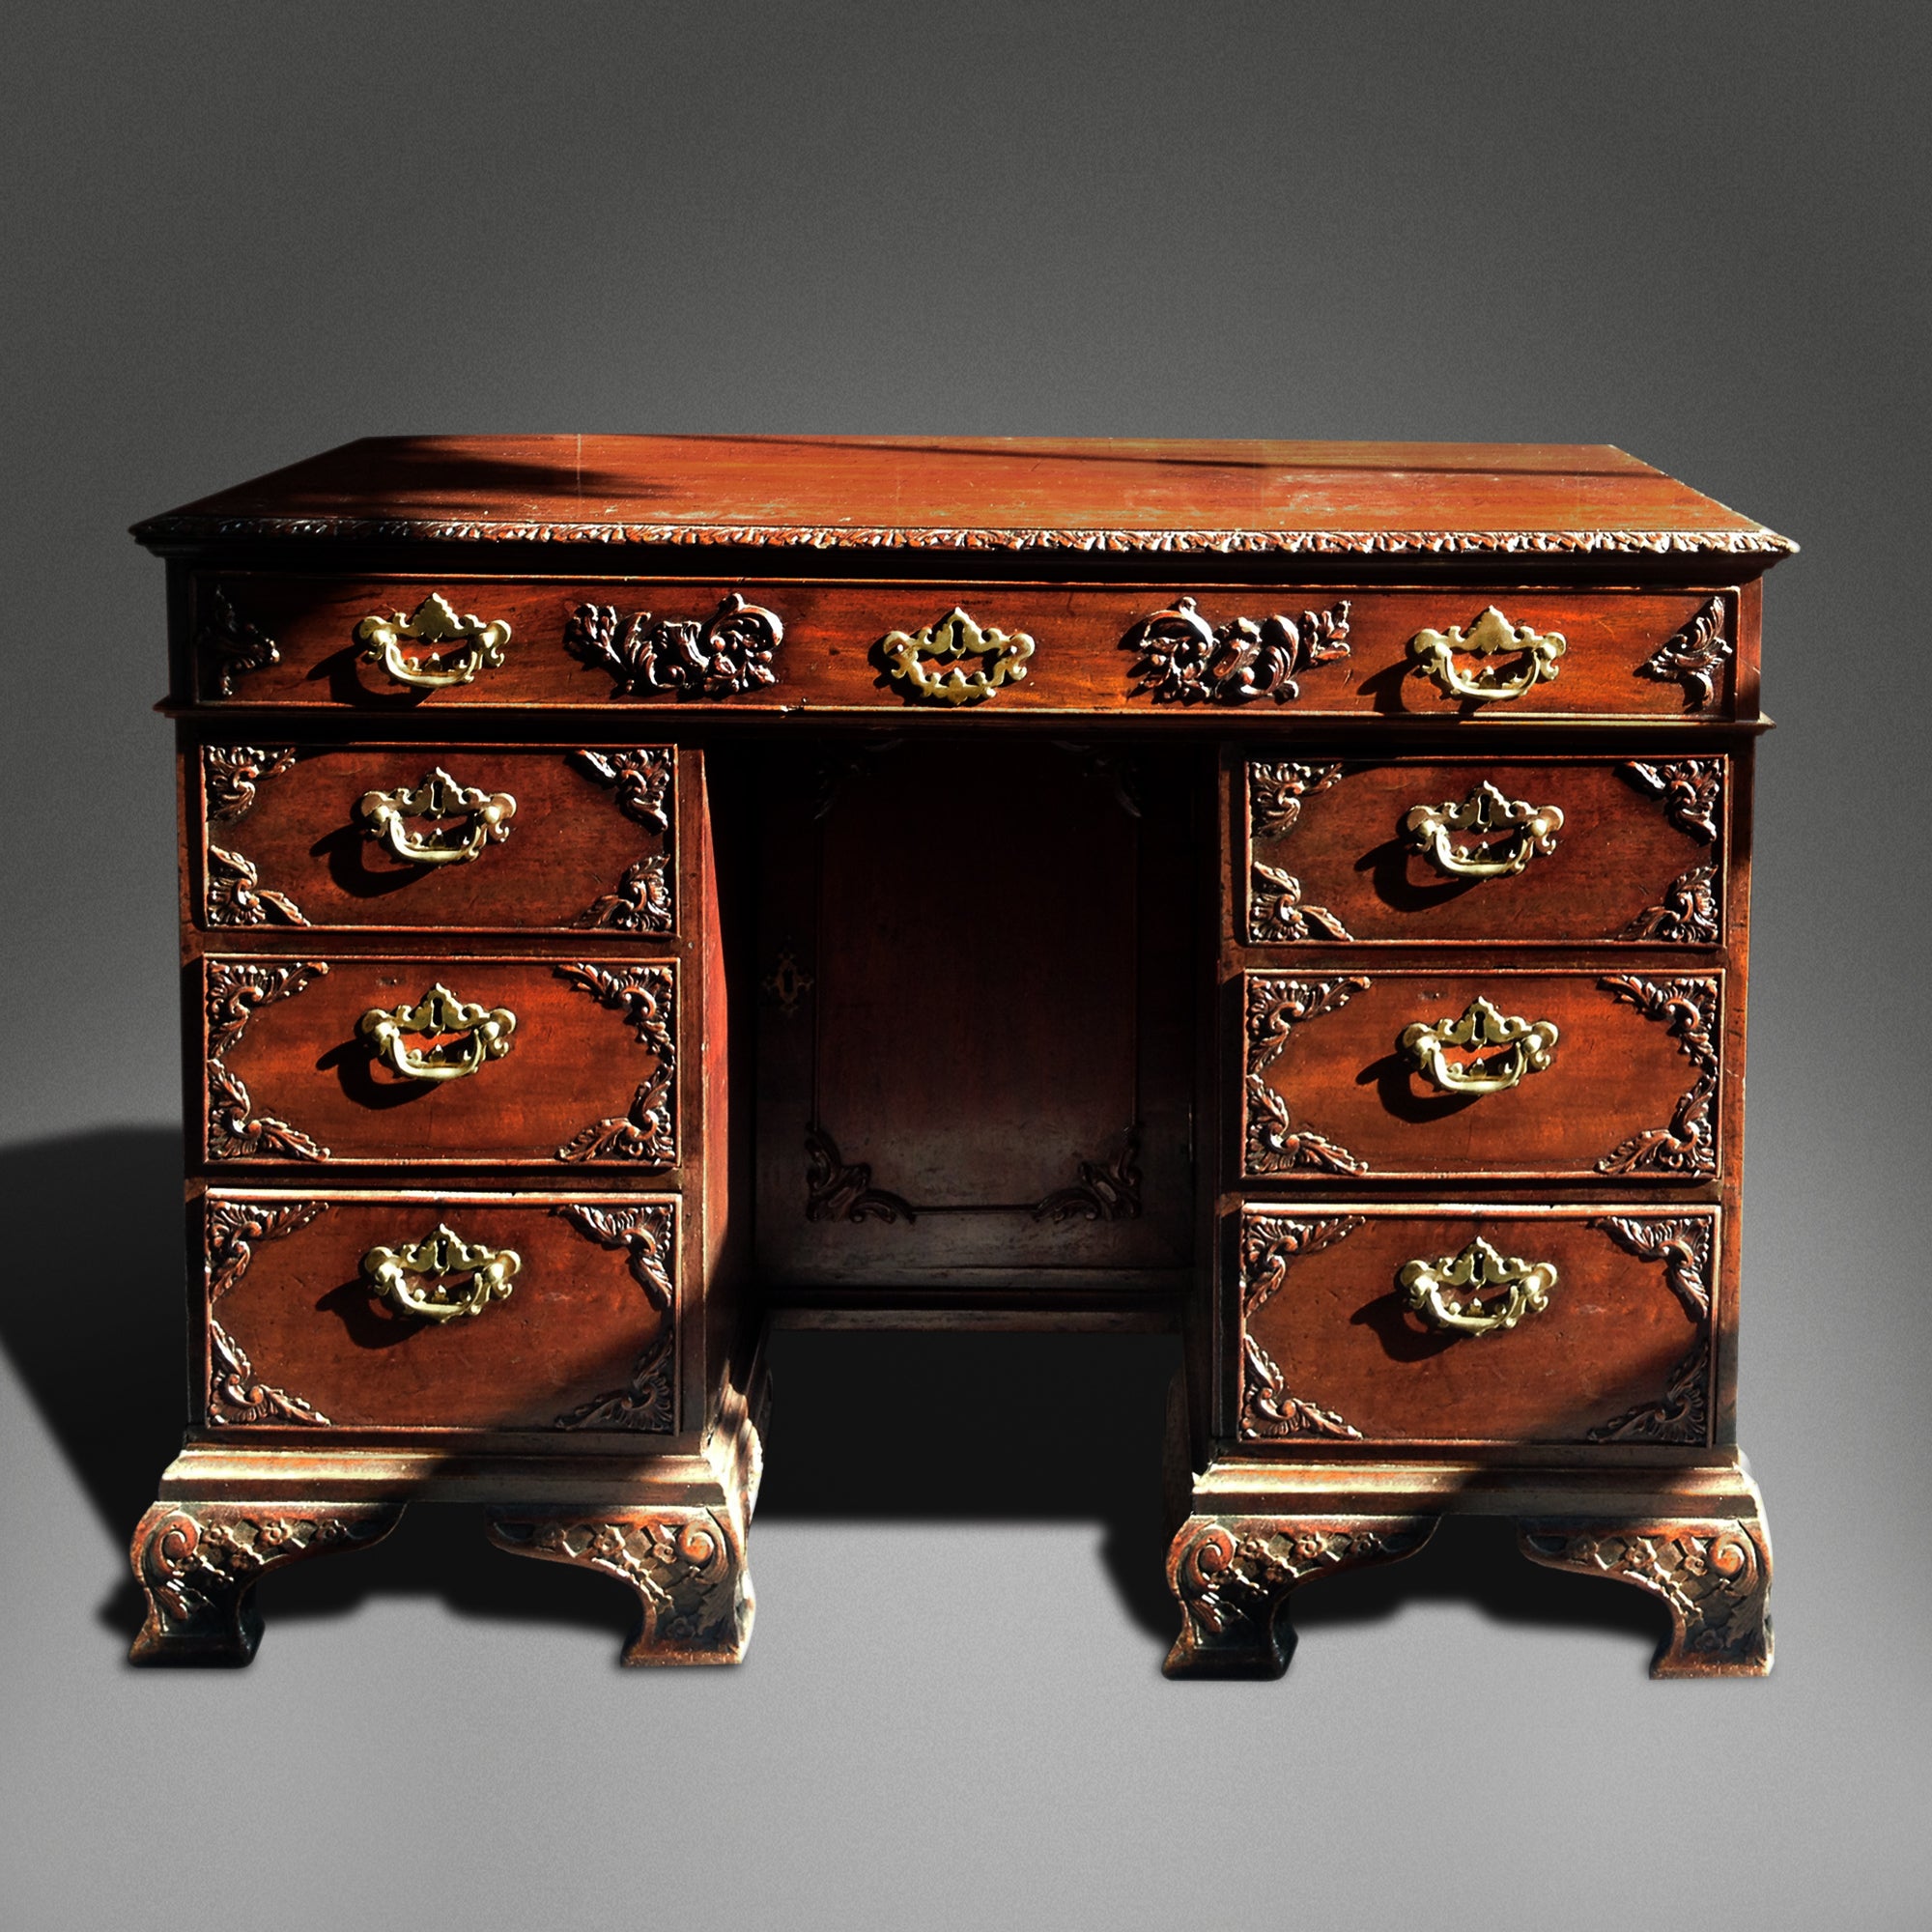 Small Mahogany Desk With Carved Detail And Brass Handles For Sale